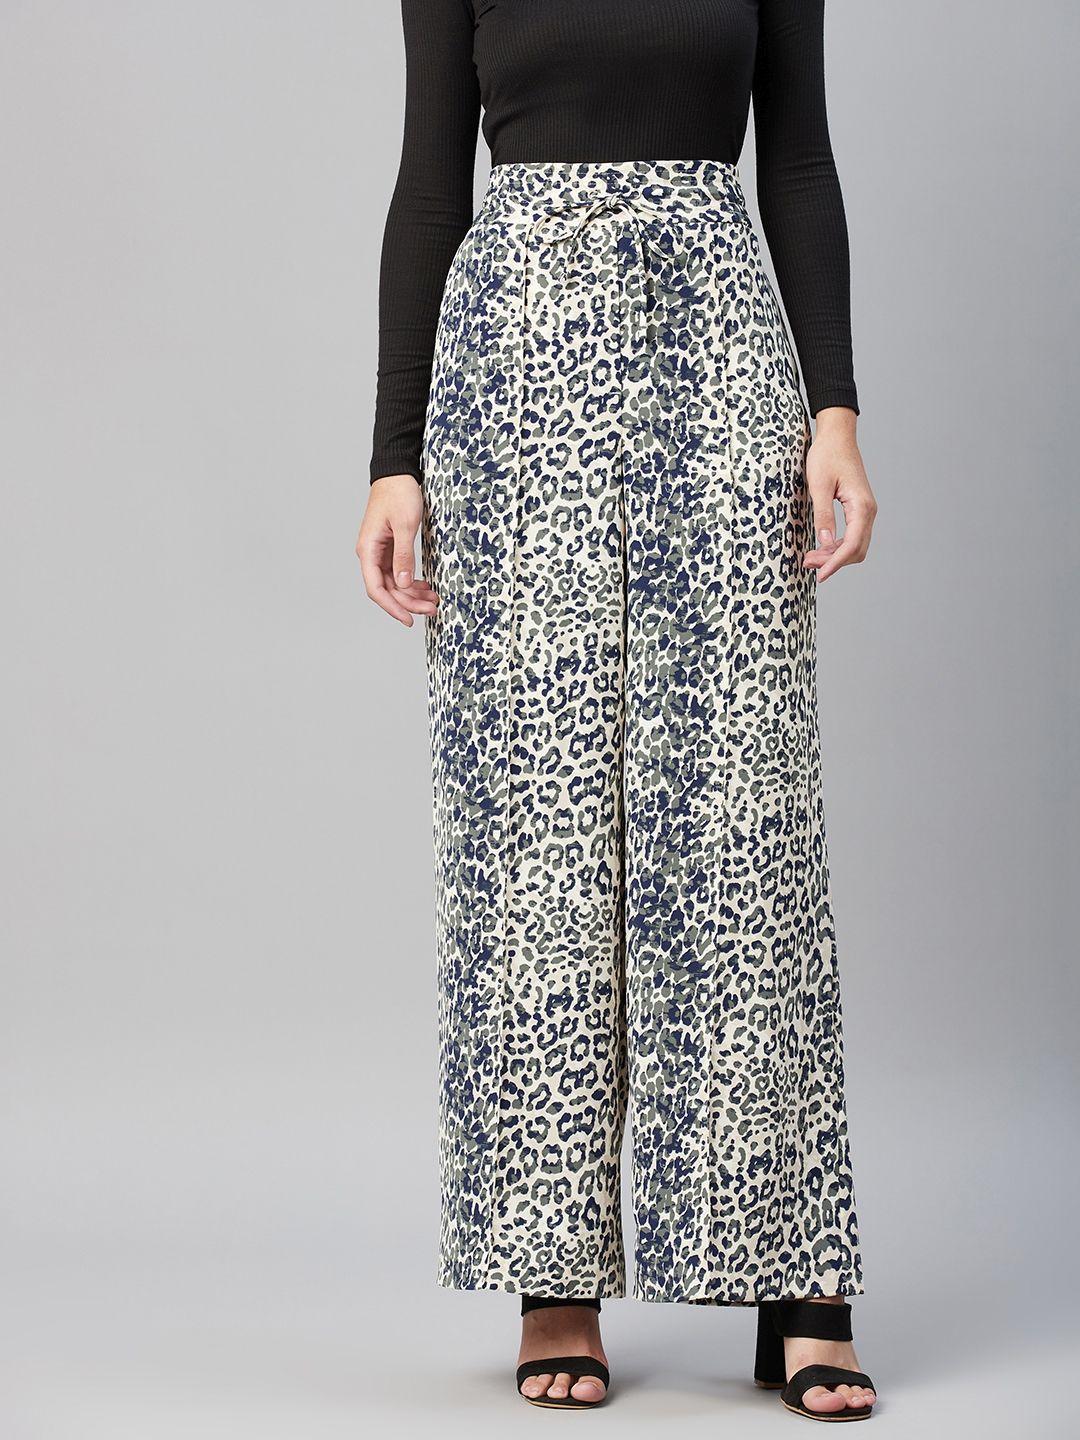 marks & spencer women cream-coloured & blue animal printed wide leg high-rise trousers